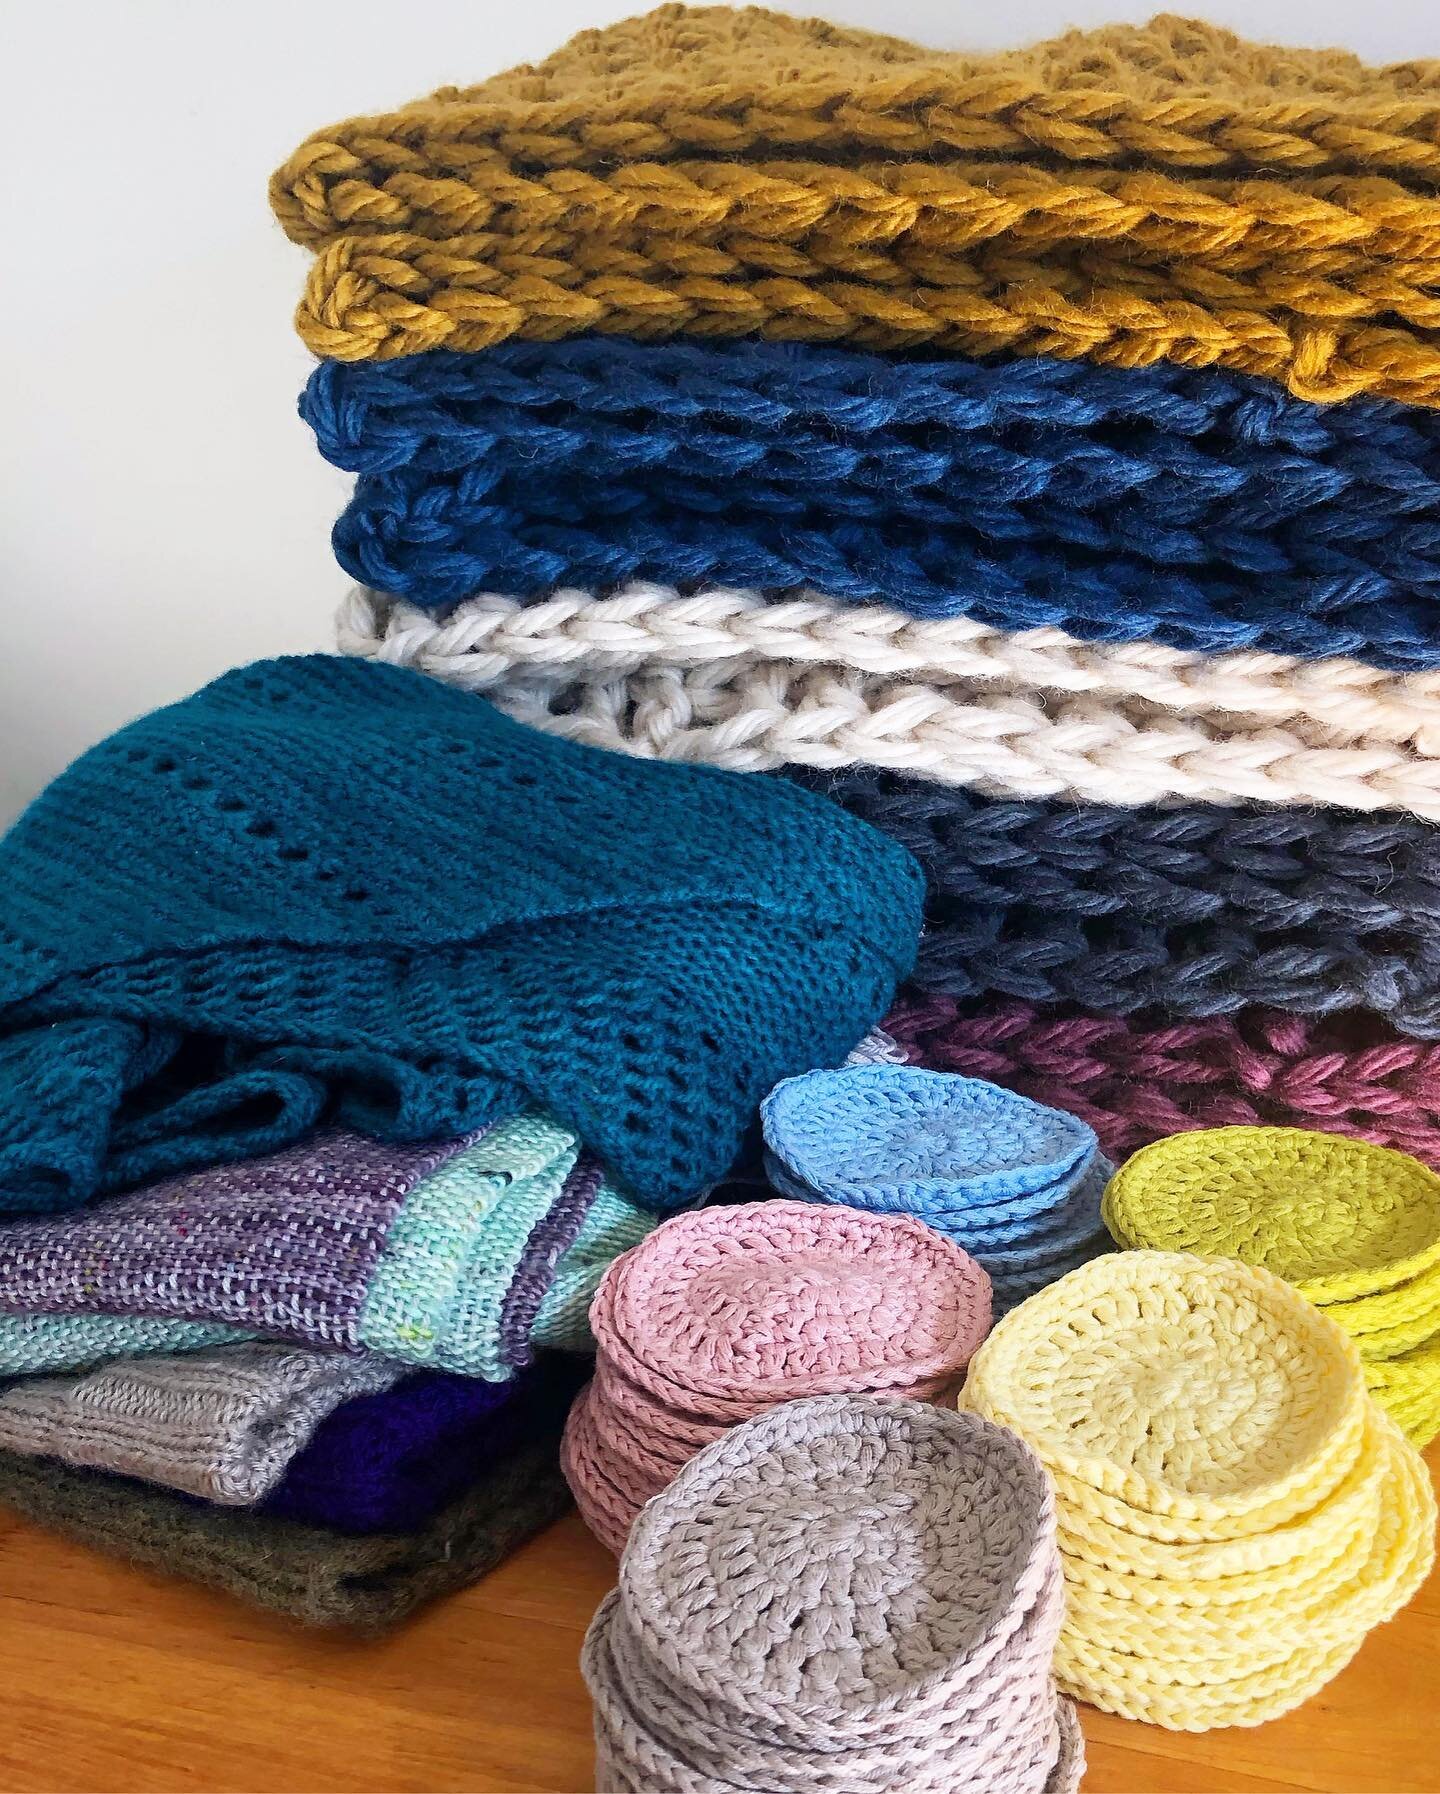 Making sure I&rsquo;m all stocked up for the @curvecollectivenz Plus Size market! 
So excited about this one - I&rsquo;ll have my knit and crochet products for sale but there&rsquo;ll be heaps of amazing people selling a range of clothing too! 
.
.
.